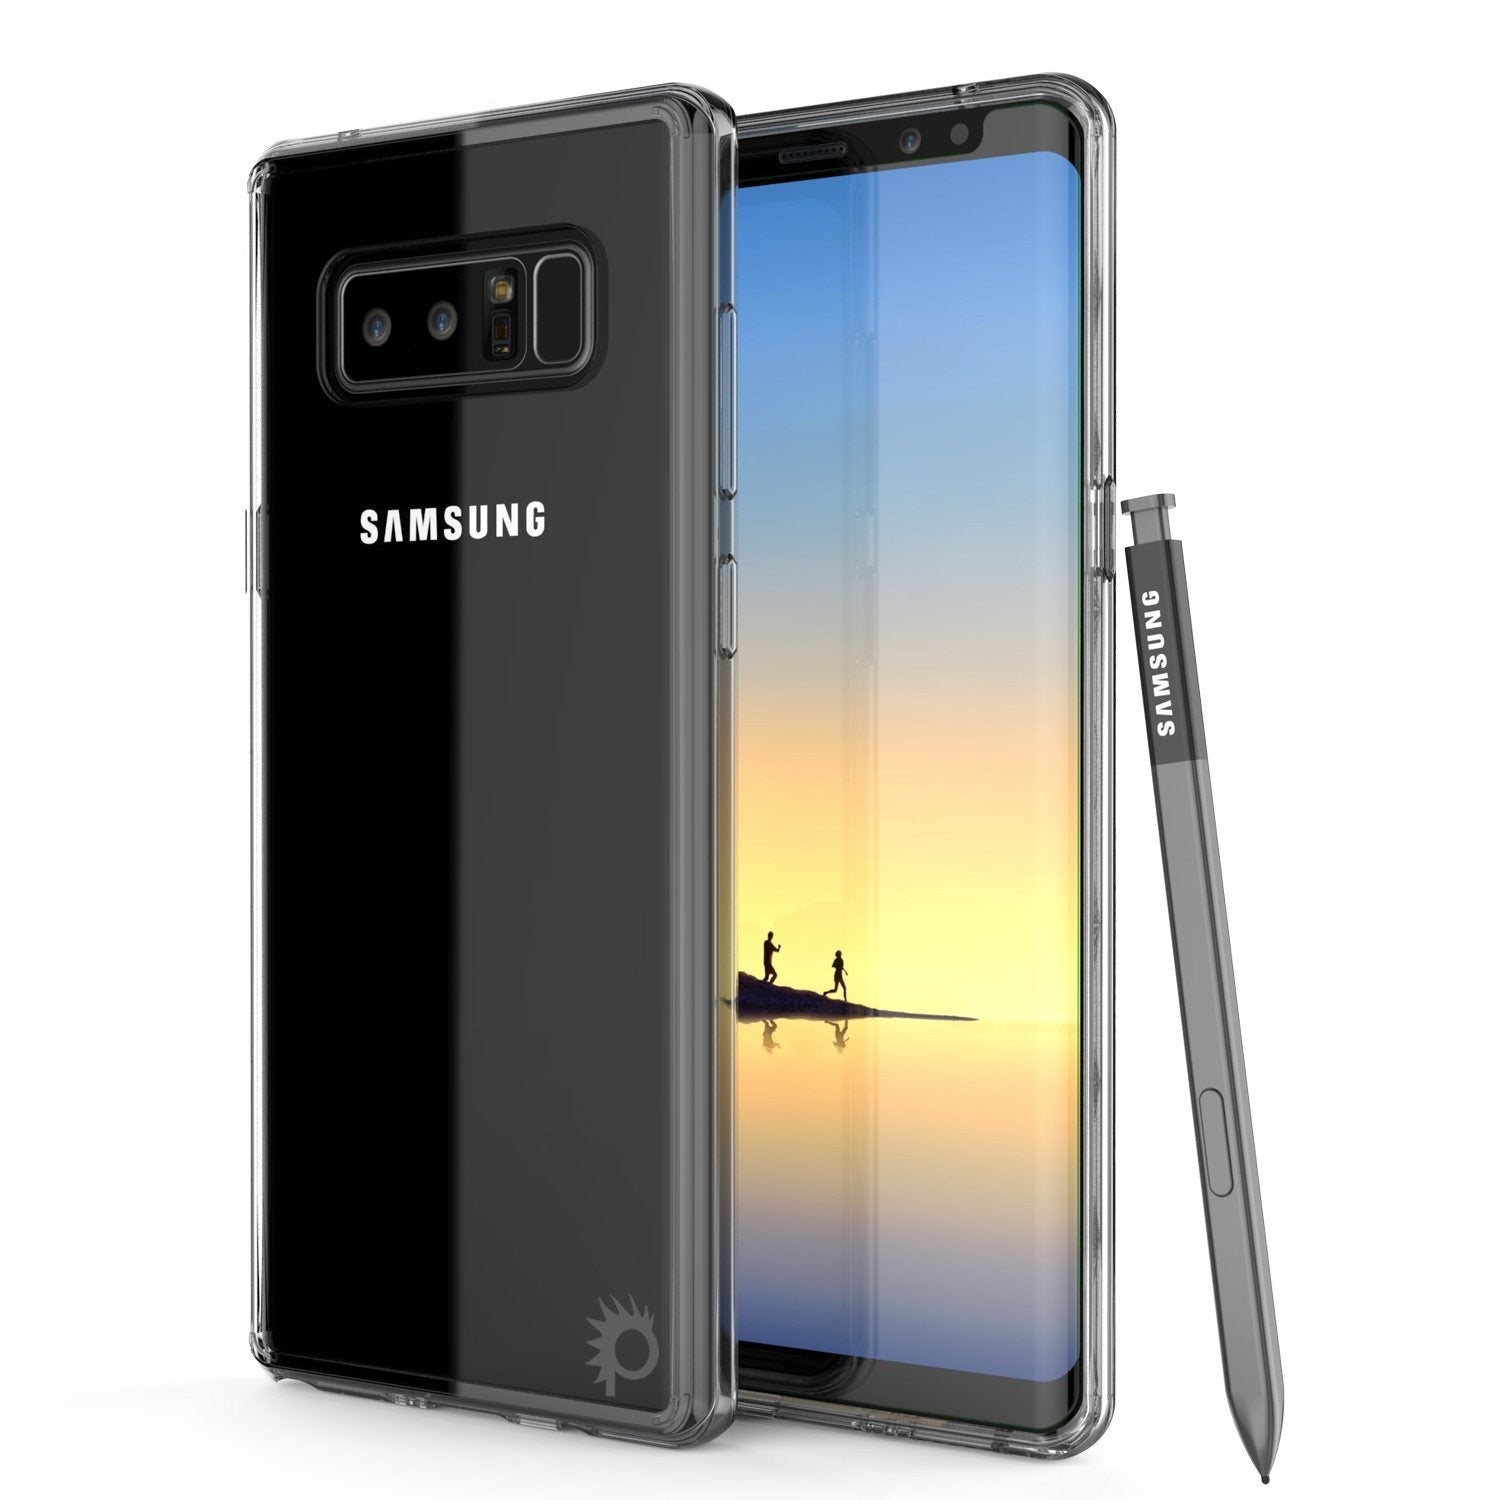 Galaxy Note 8 Case, PUNKcase [LUCID 2.0 Series] [Slim Fit] Armor Cover w/Integrated Anti-Shock System & PUNKSHIELD Screen Protector [Crystal Black]